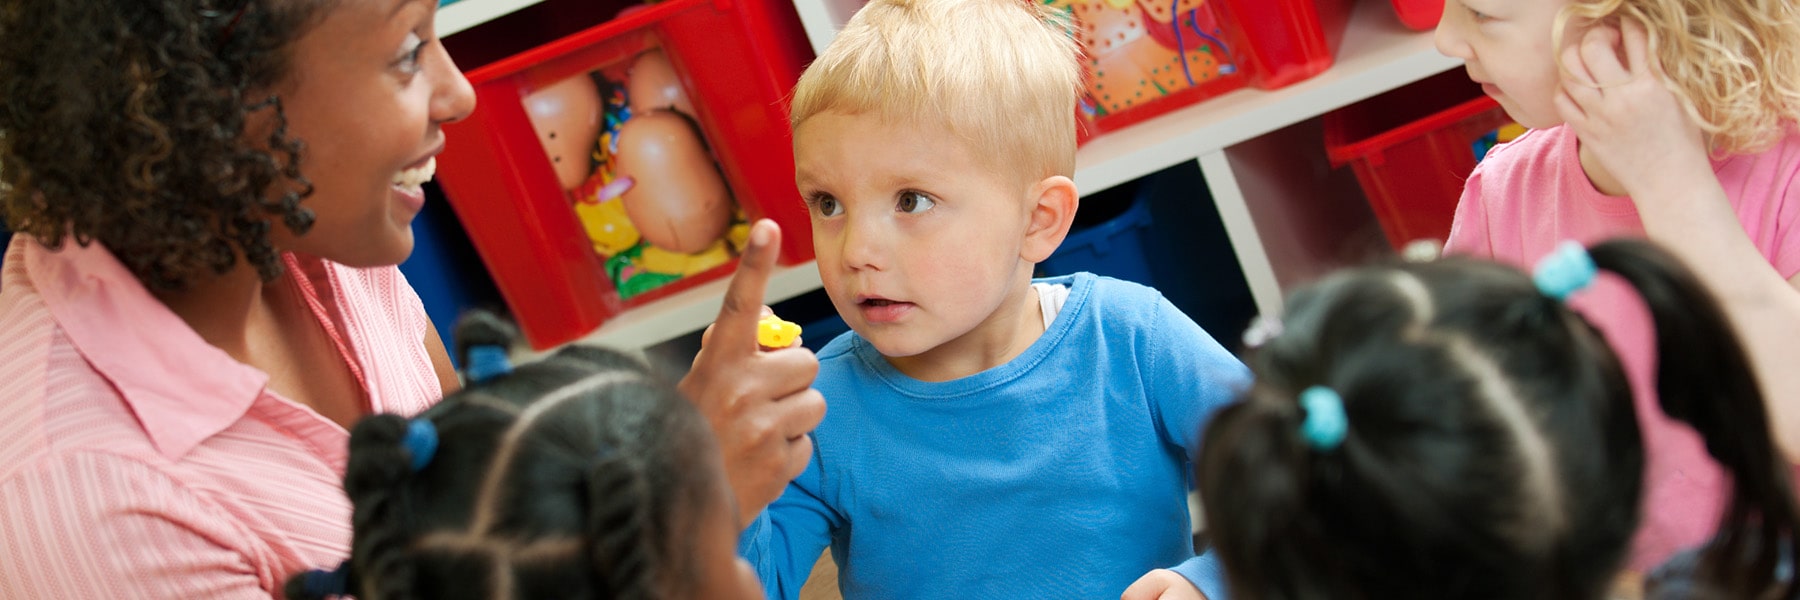 young teacher gesturing to toddlers while holding up index finger